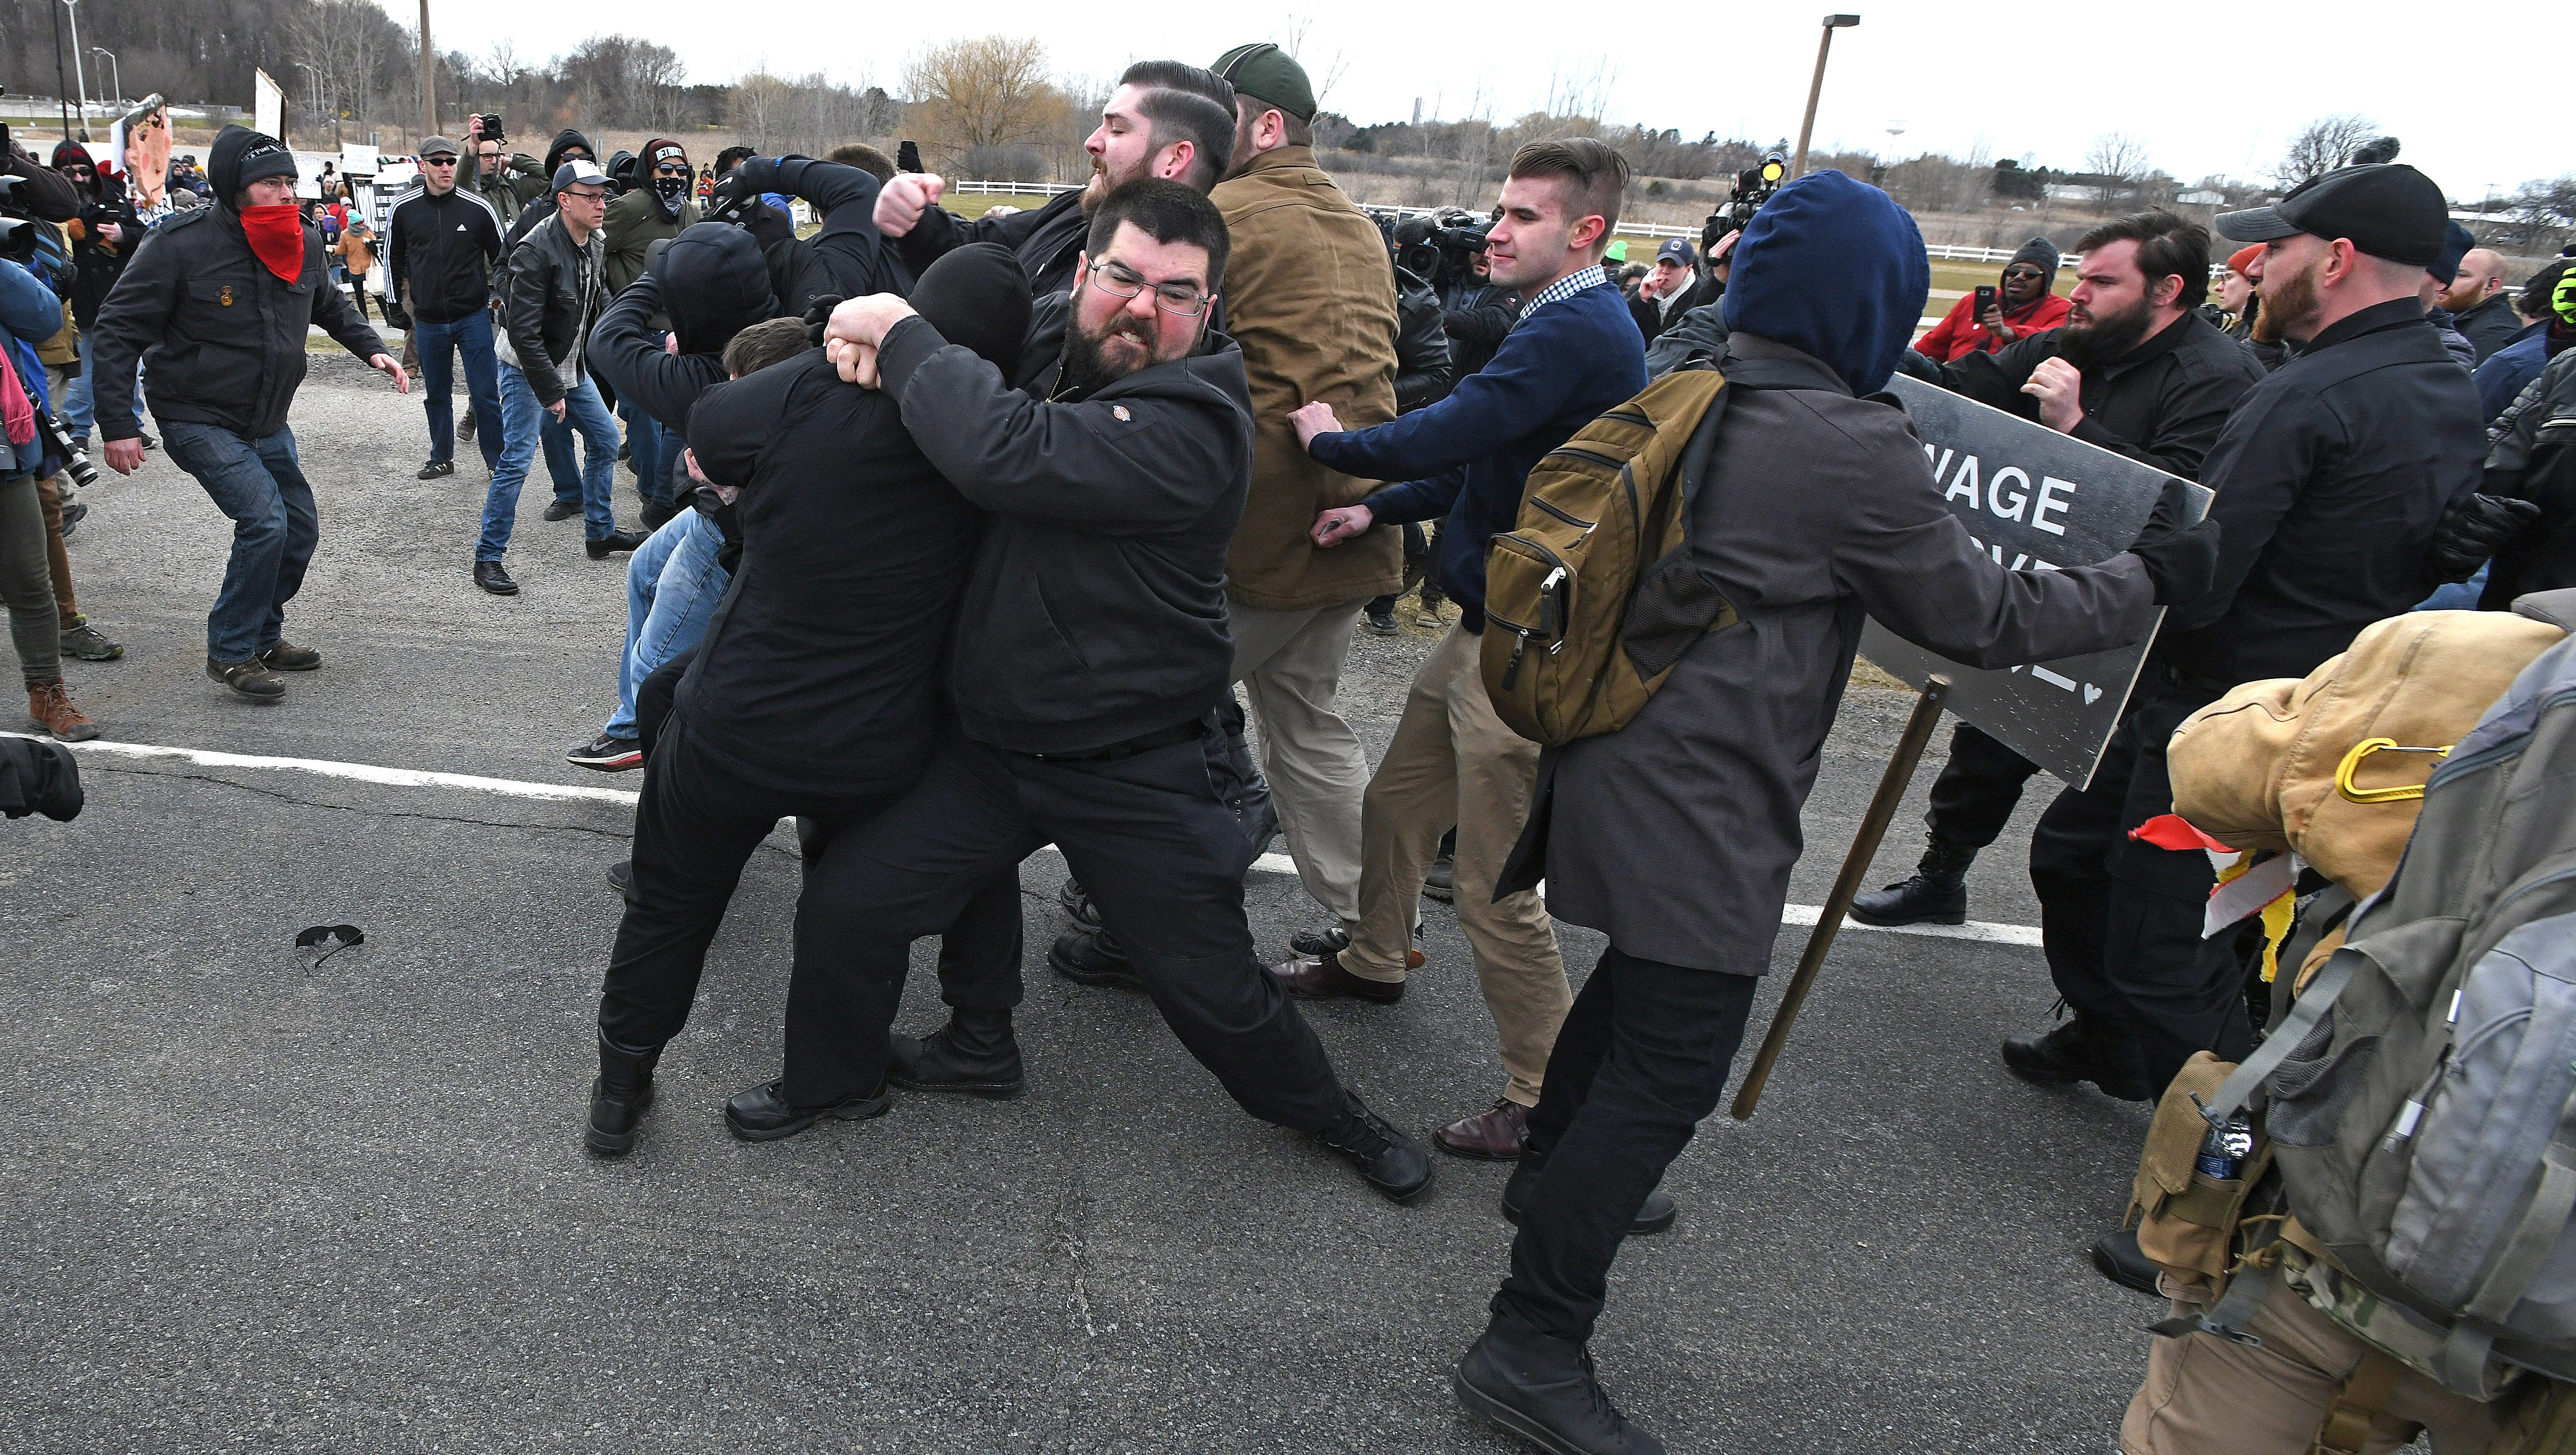 Matthew Heimbach, top, leader of the white nationalist Traditional Workers Party tackles a Richard Spencer protester.